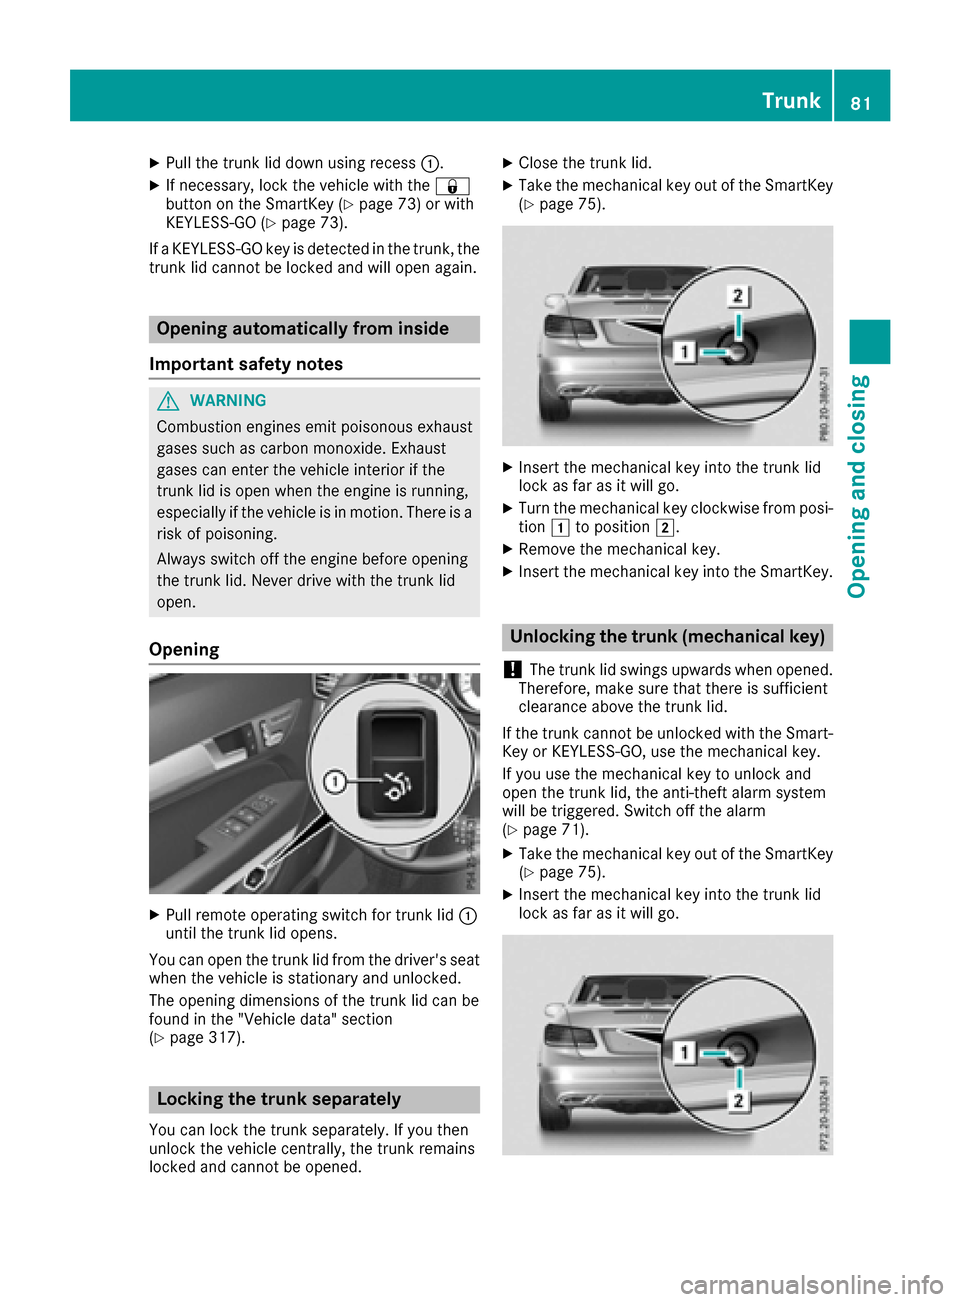 MERCEDES-BENZ E-Class CABRIOLET 2017 A207 Owners Guide XPull the trunk lid down using recess:.
XIf necessary, lock the vehicle with the &
button on the SmartKey (Ypage 73) or with
KEYLESS-GO (Ypage 73).
If a KEYLESS-GO key is detected in the trunk, the
tr